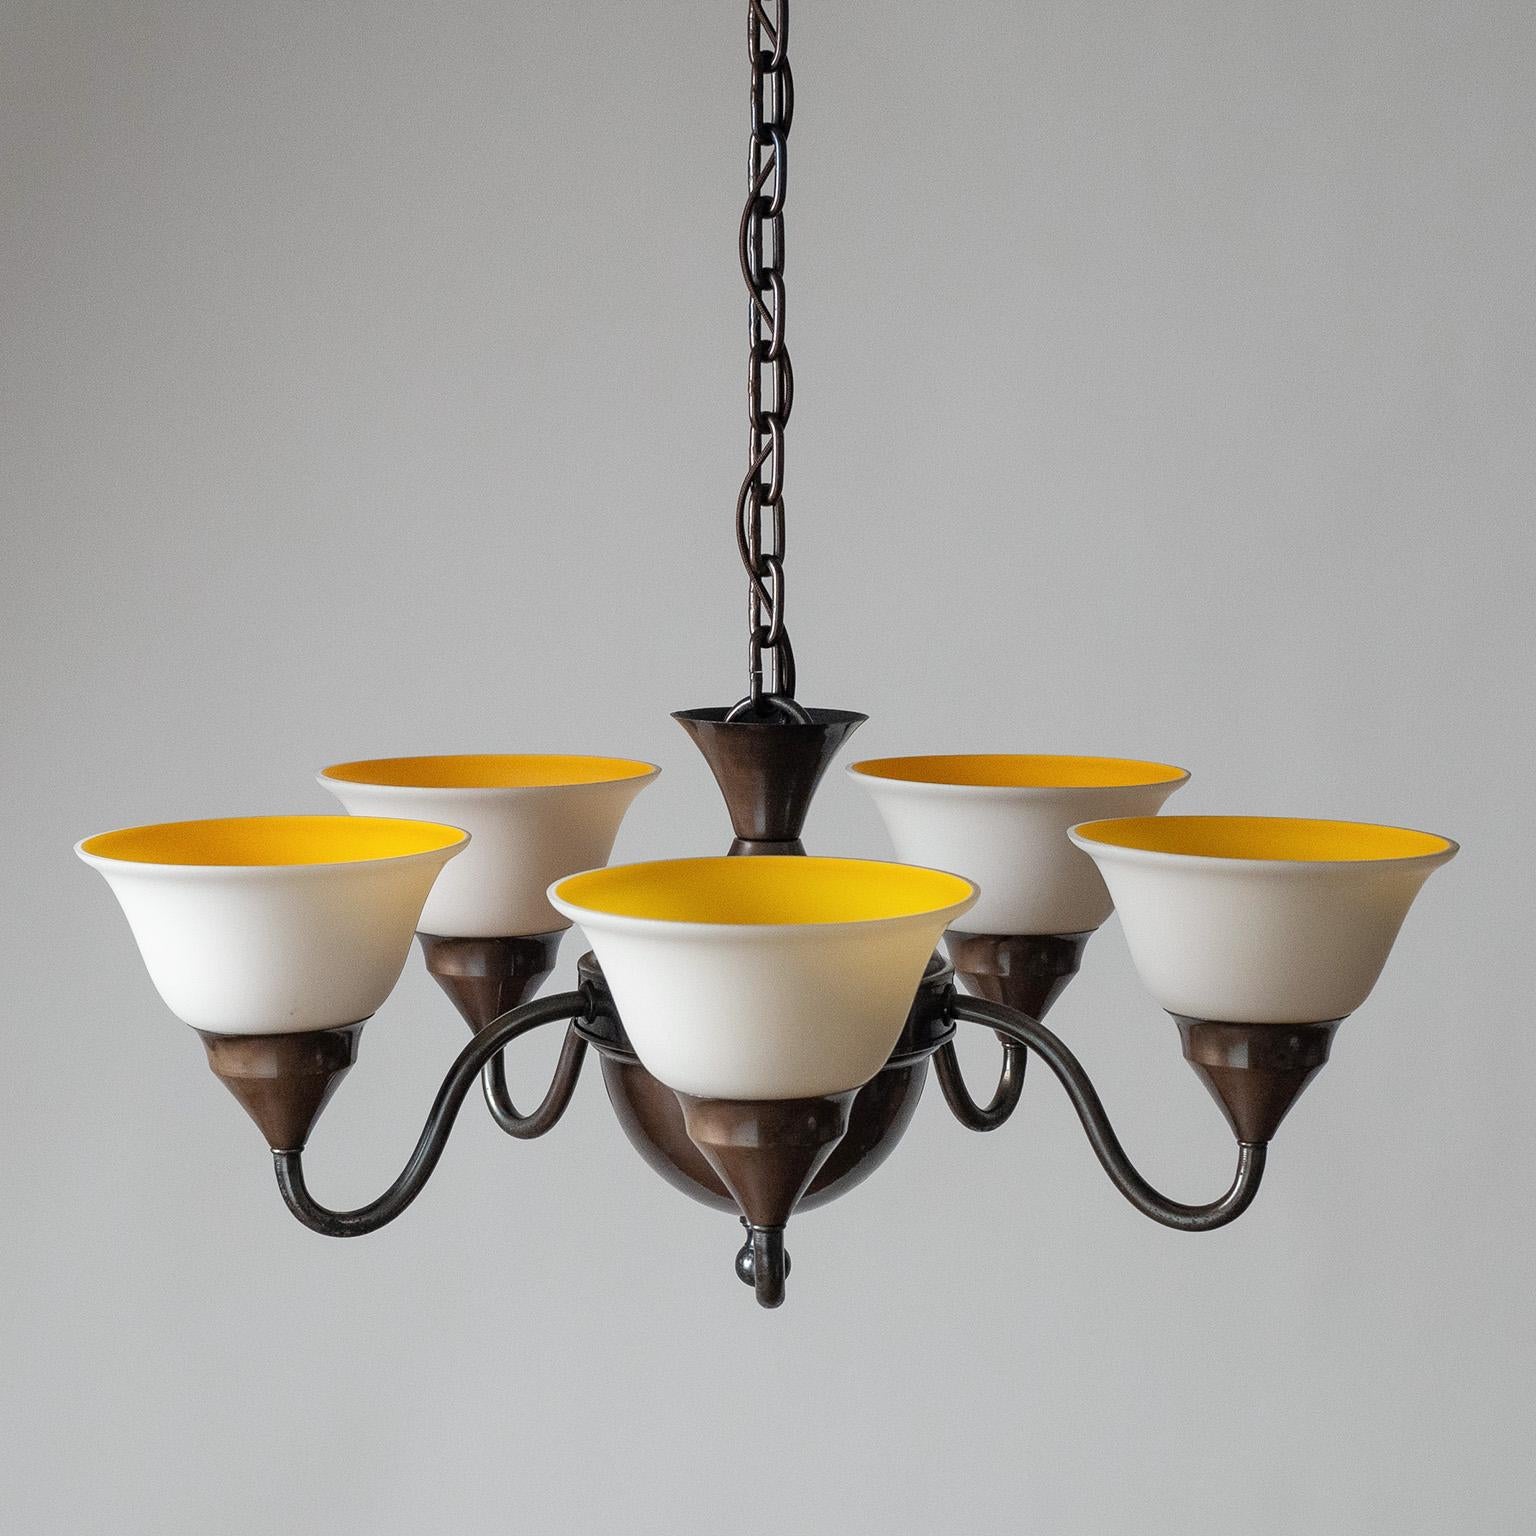 Early 20th Century Swedish Patinated Brass Chandelier, 1920s, Enameled Glass For Sale